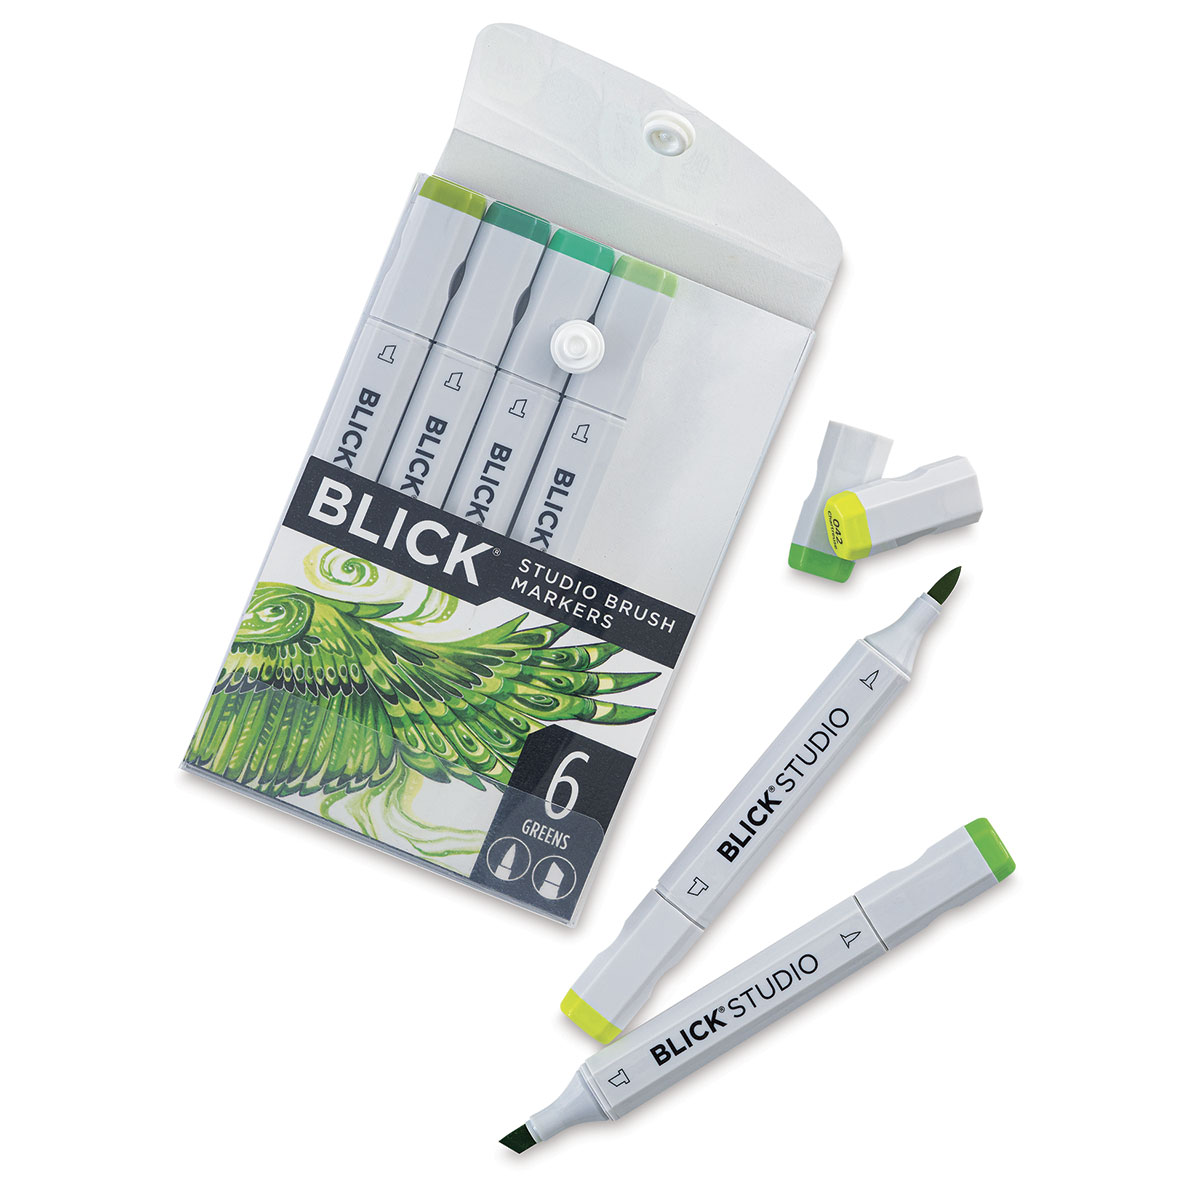 Blick Studio Brush Markers - Assorted Colors, Set of 24